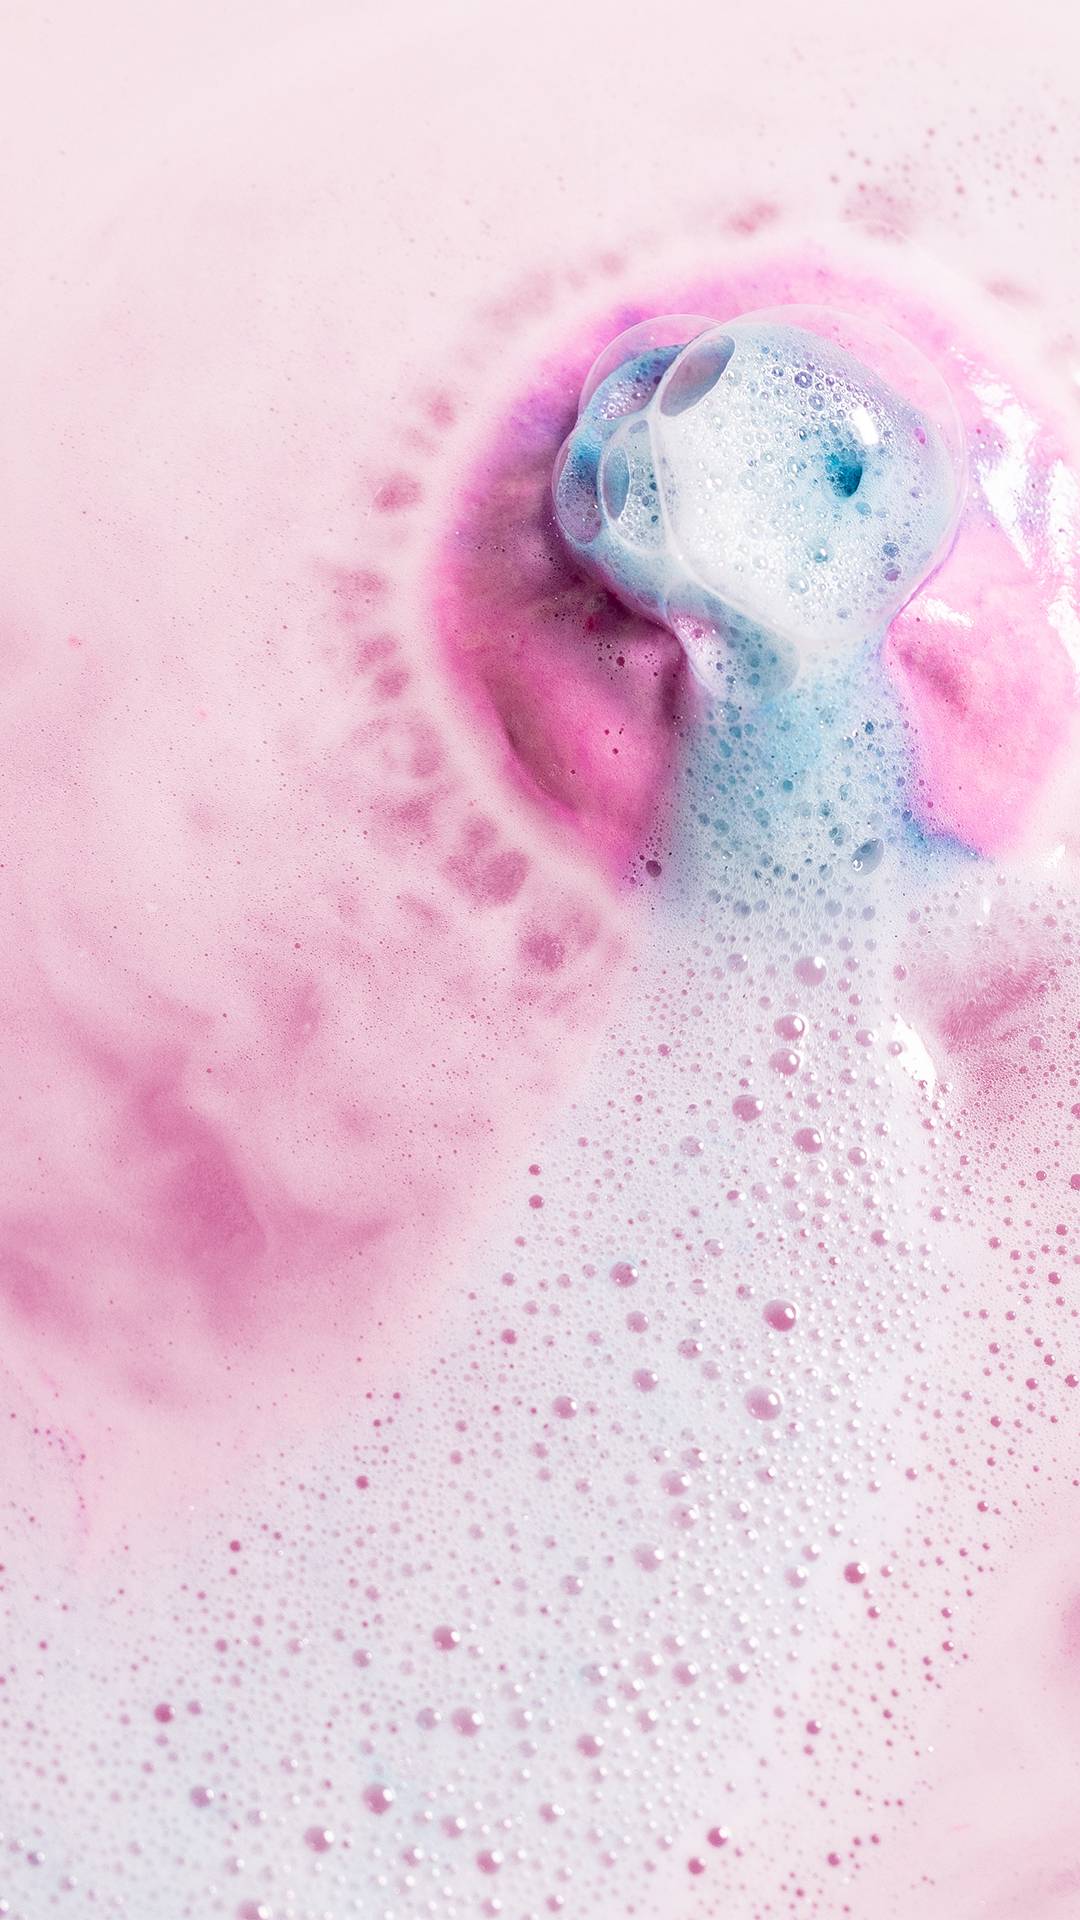 Twilight bomb frothing up in the bath, pink and blue bubbles.